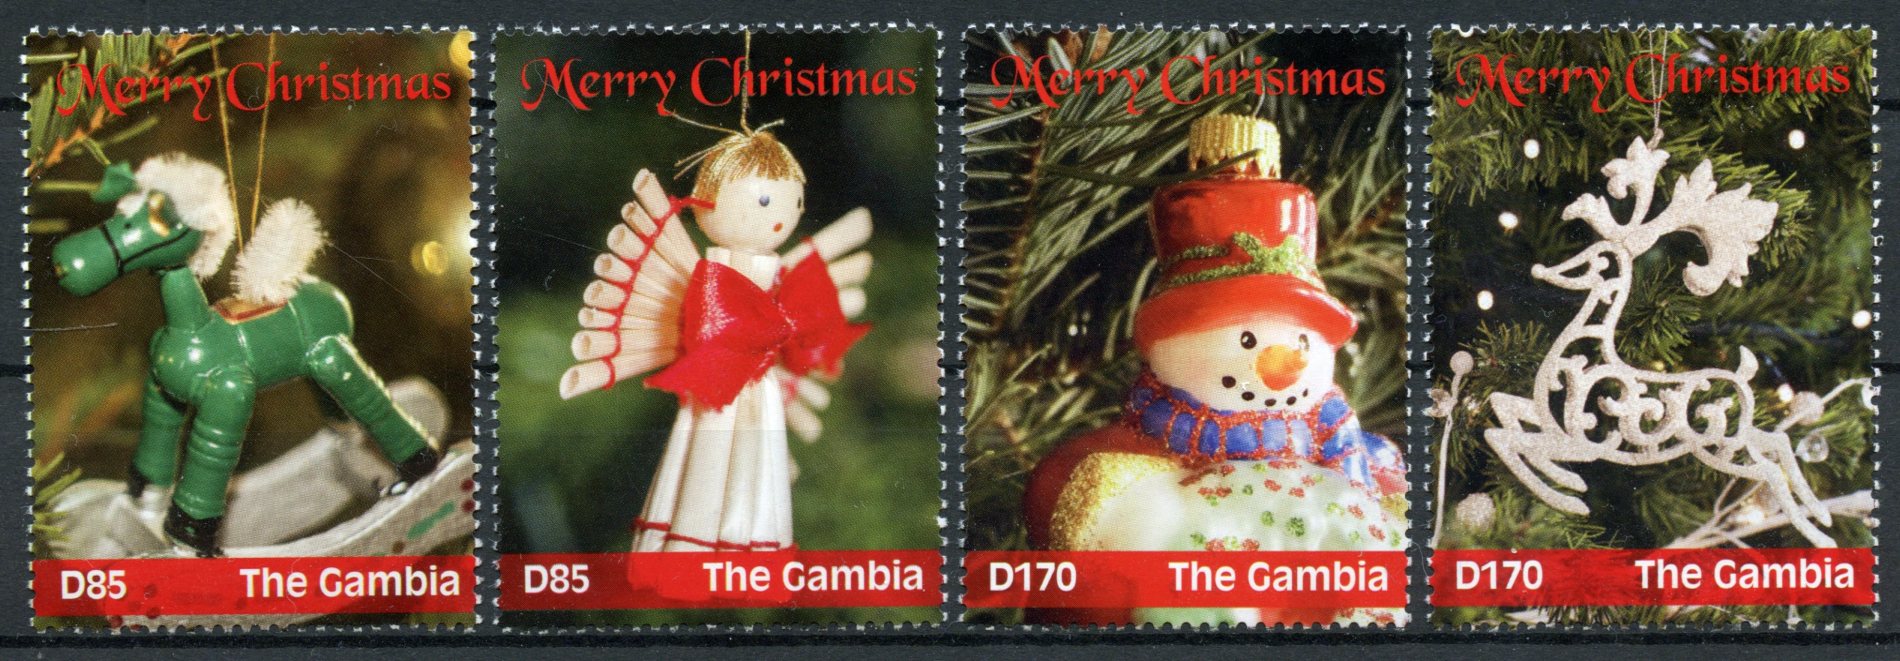 Gambia 2016 MNH Merry Christmas 4v Set Decorations Ornaments Stamps